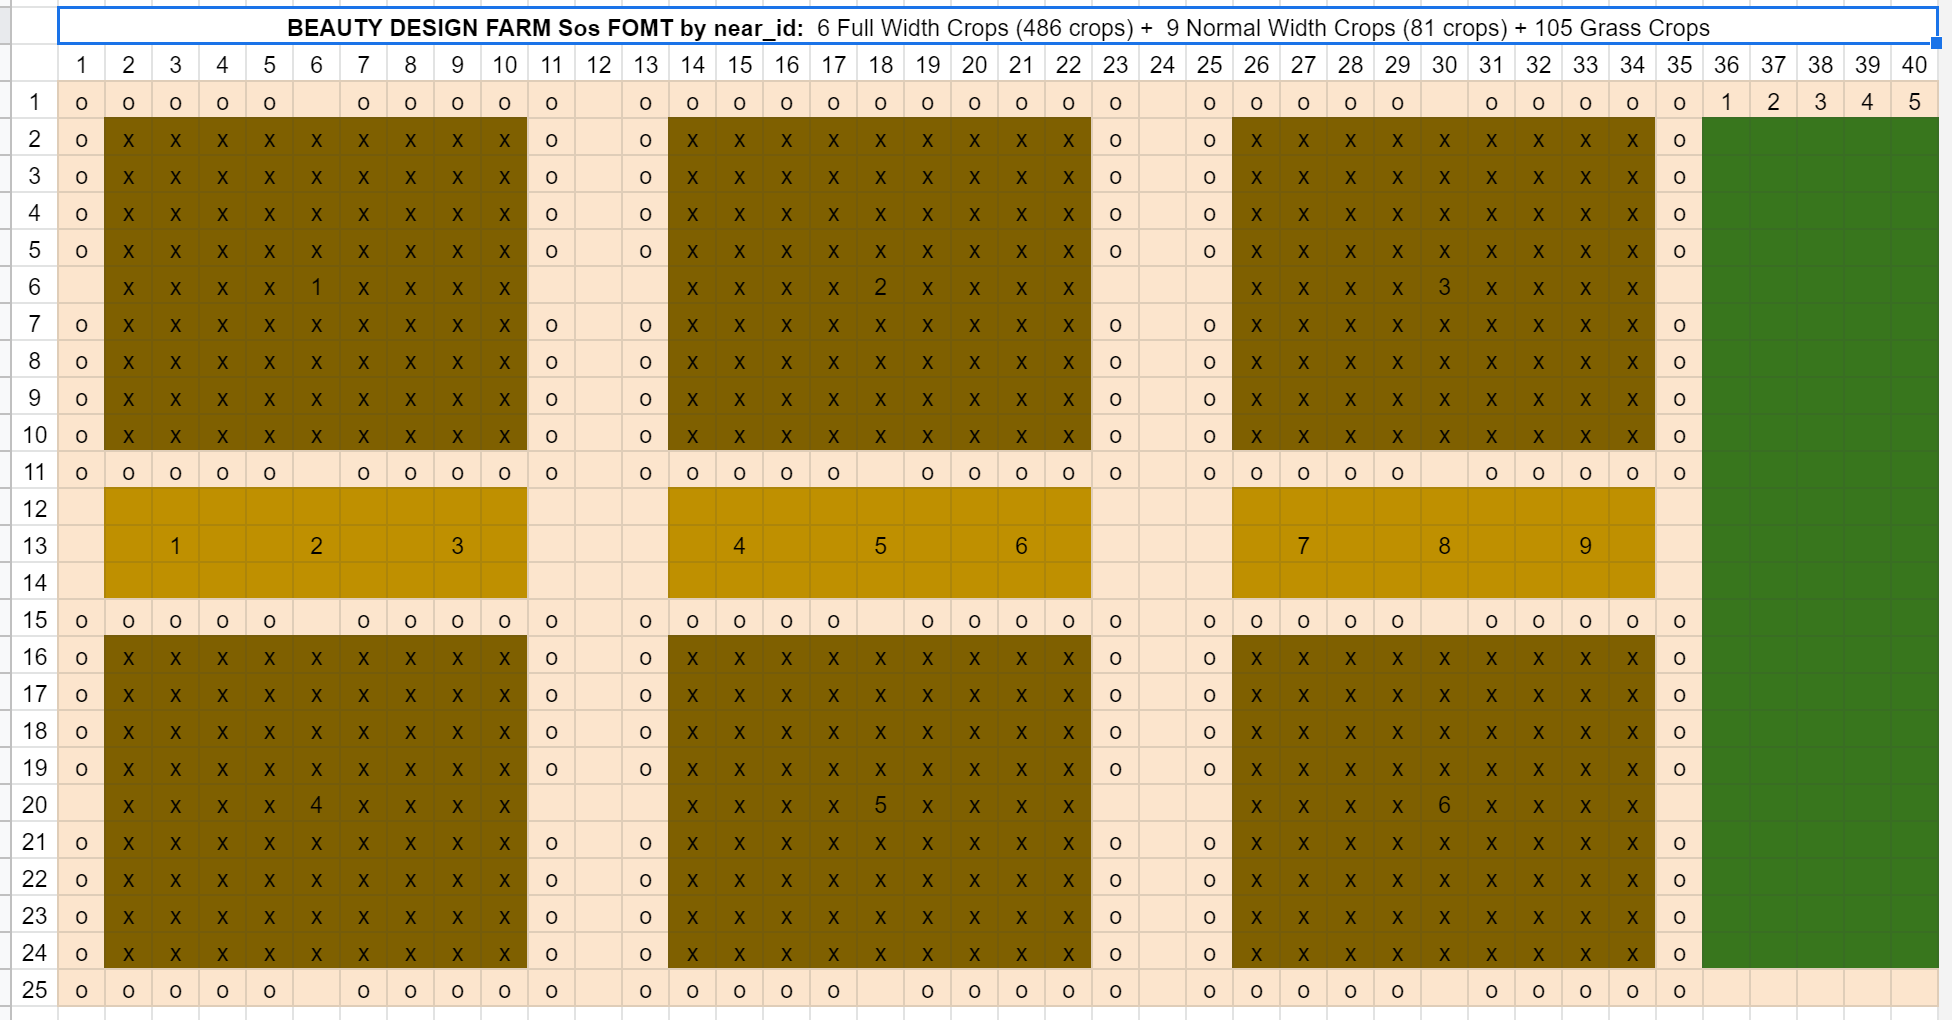 STORY OF SEASONS: Friends of Mineral Town - Farm Table Design for Max Mithril Efficient + Effectiveness